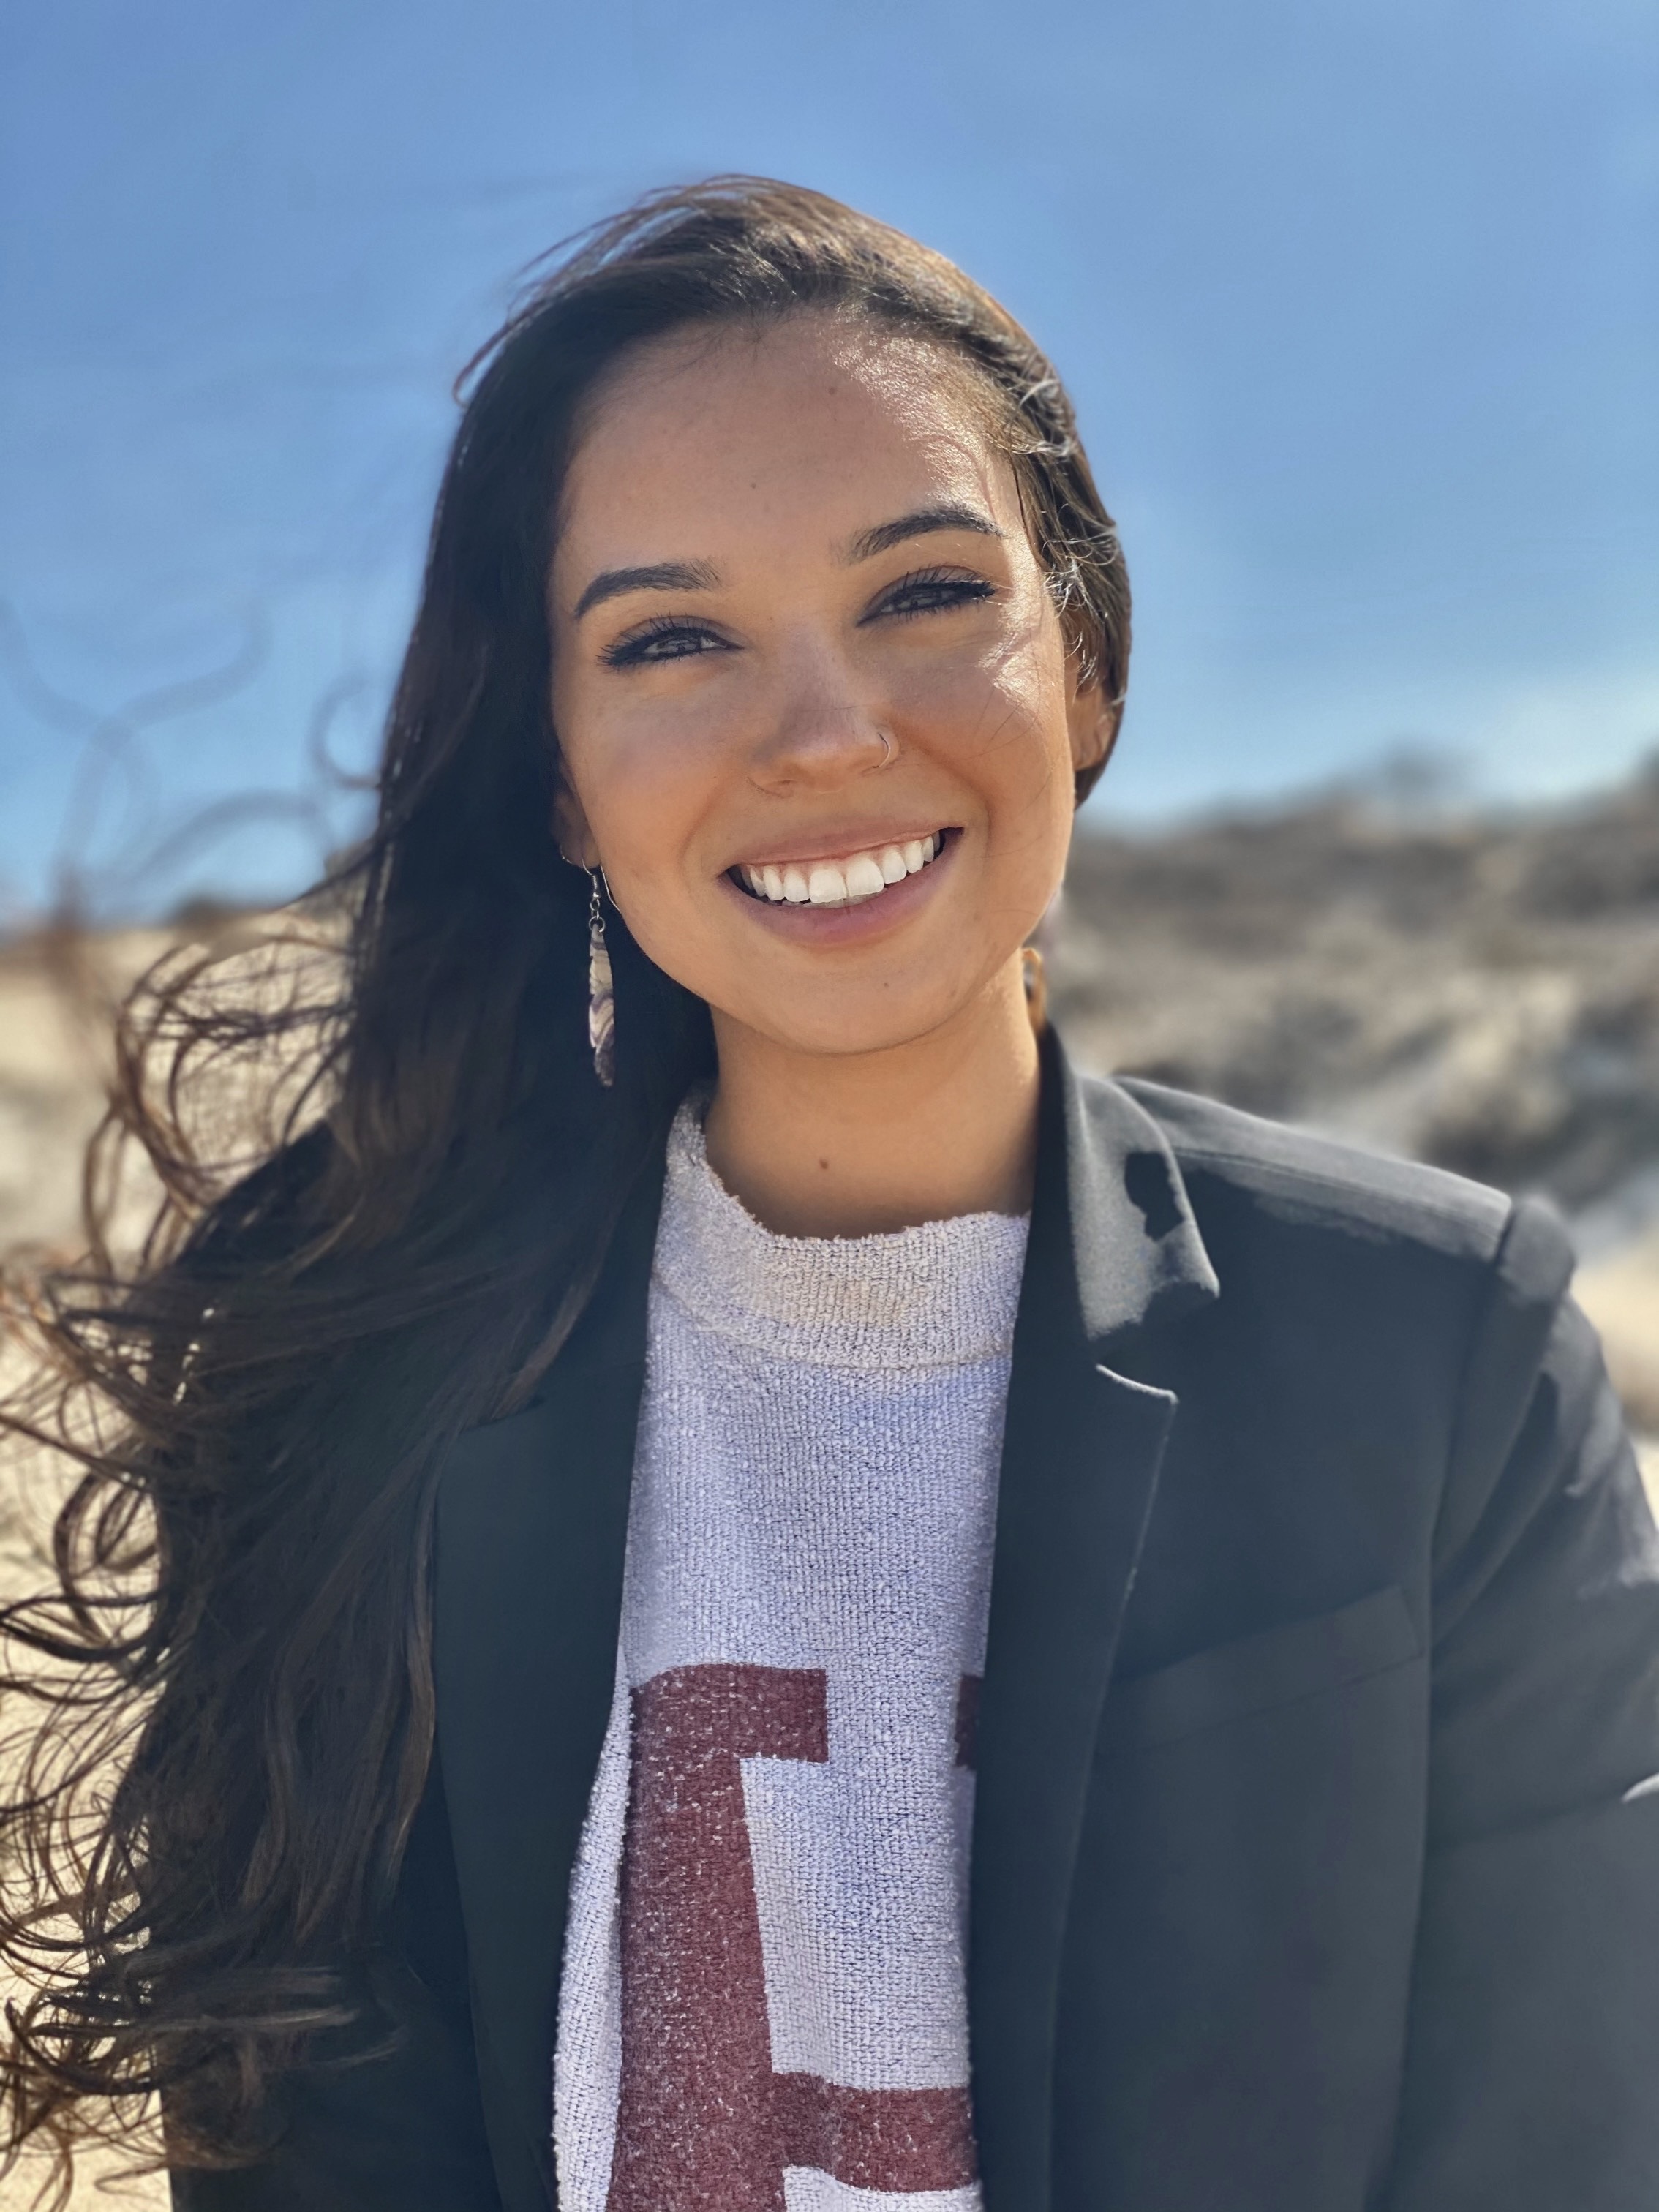 Samantha Maltais, winner of the American Indian College Fund Law School Scholarship. The scholarship covers the entire cost of a Harvard Law School education. Photo courtesy of Samantha Maltais.